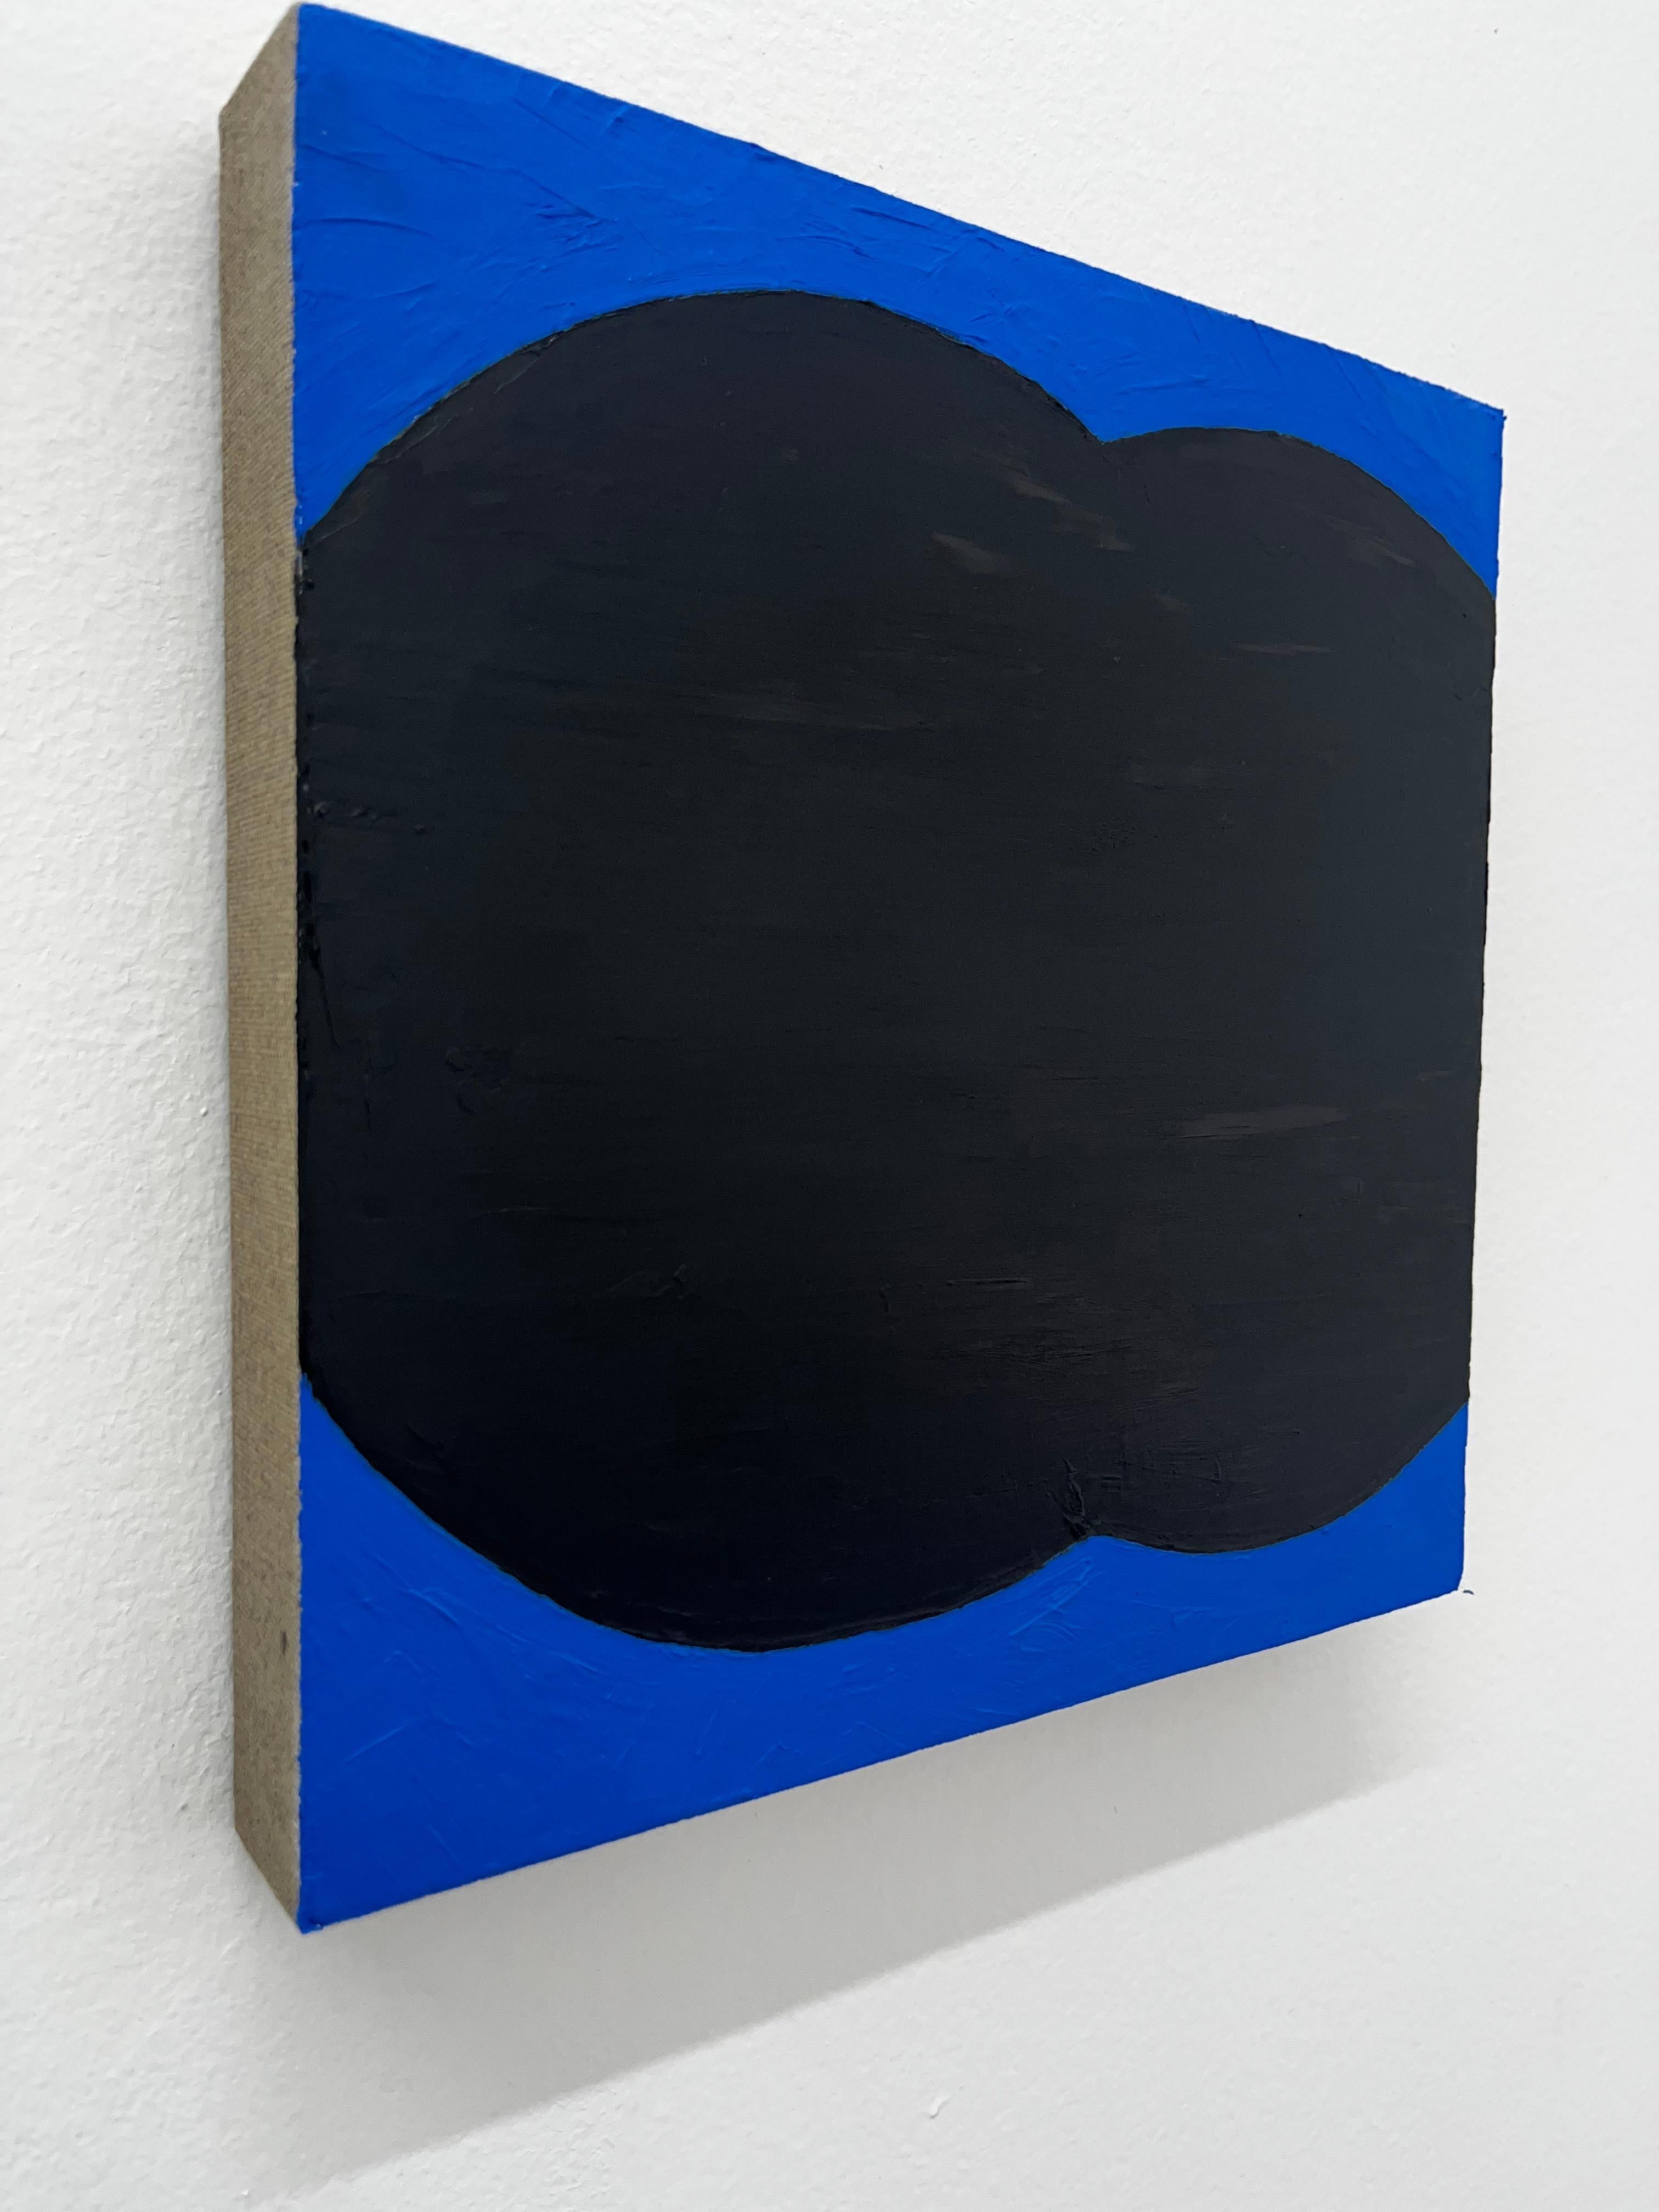 Untitled - abstract oil painting, lines, blue & black - Painting by Nicolás Guzmán